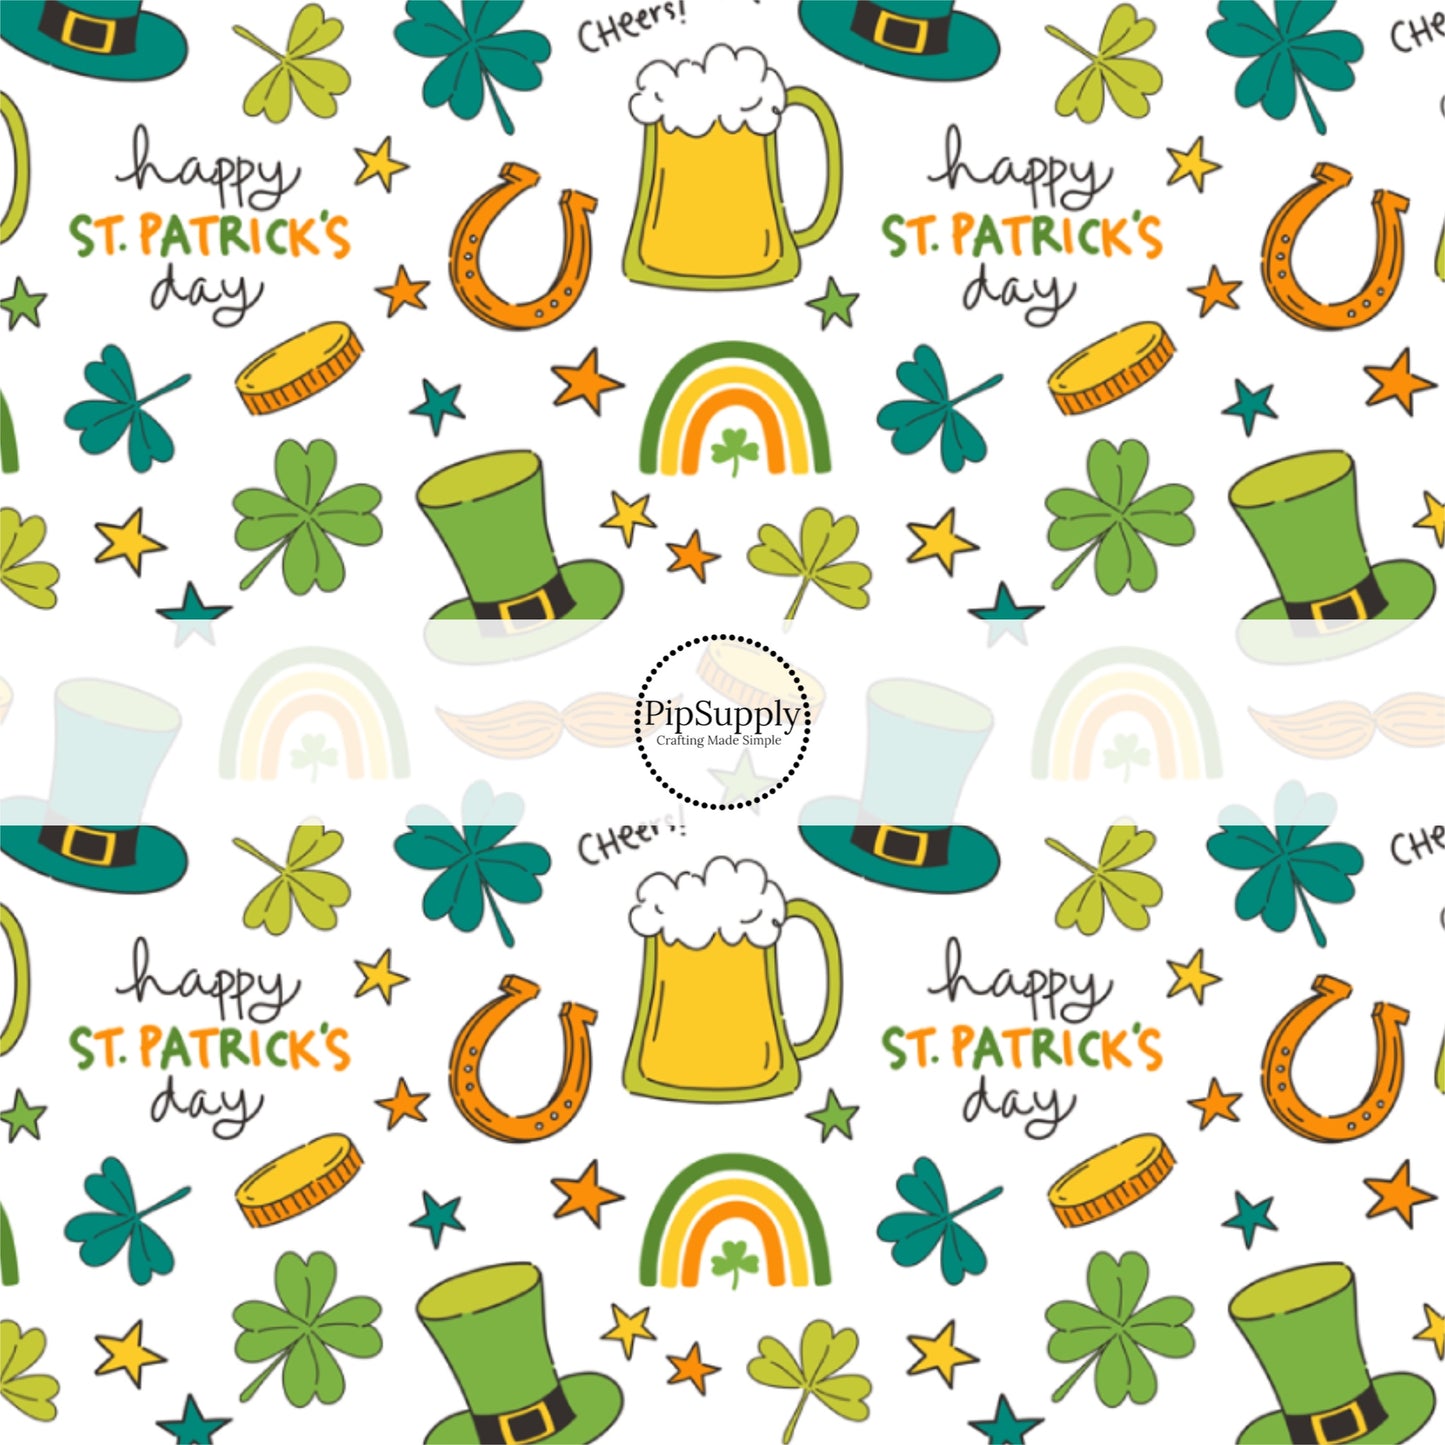 Beers, Clovers, Gold Coins, Rainbows, and Top Hats on White Fabric by the Yard.